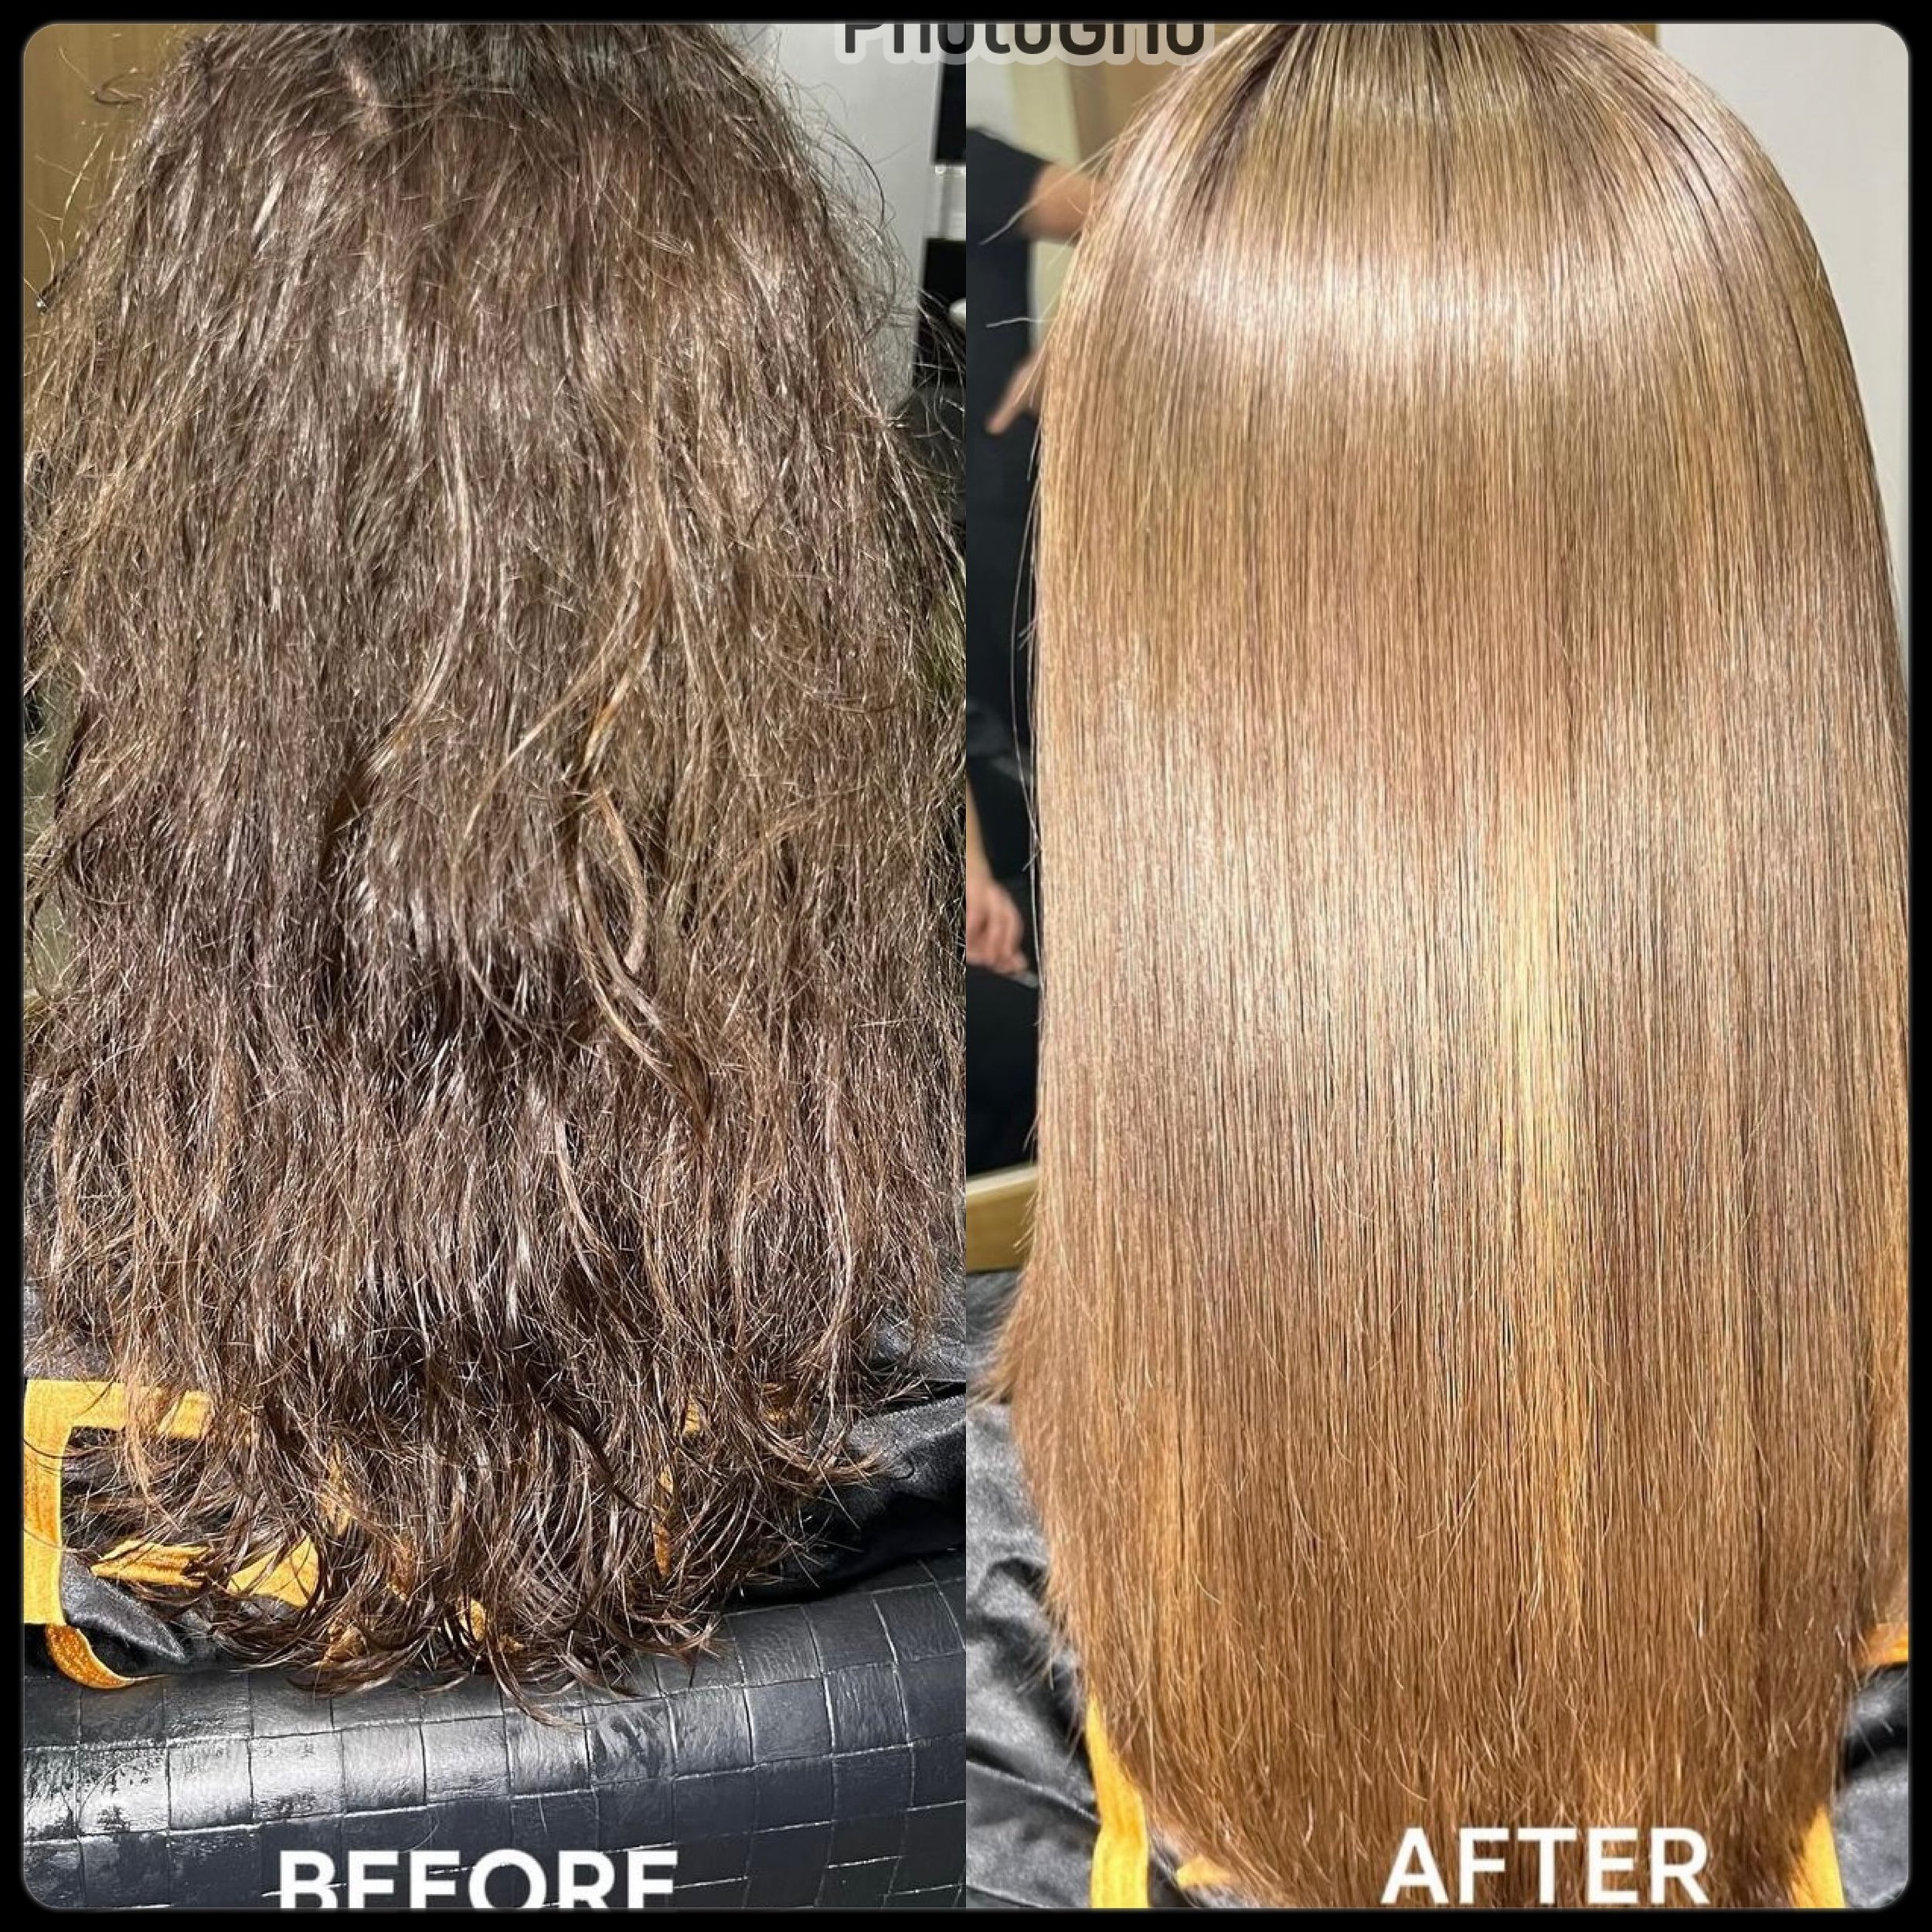 Before and after NANOPLASTY TREATMENT
See the difference and wonders that
Nano Pro can do because of its amazing ingredients that has no harmful chemicals and provenly effective!~
Try Nanoplasty today!
#nanoplastyhairtreatment #chemicalfree #vegan #h